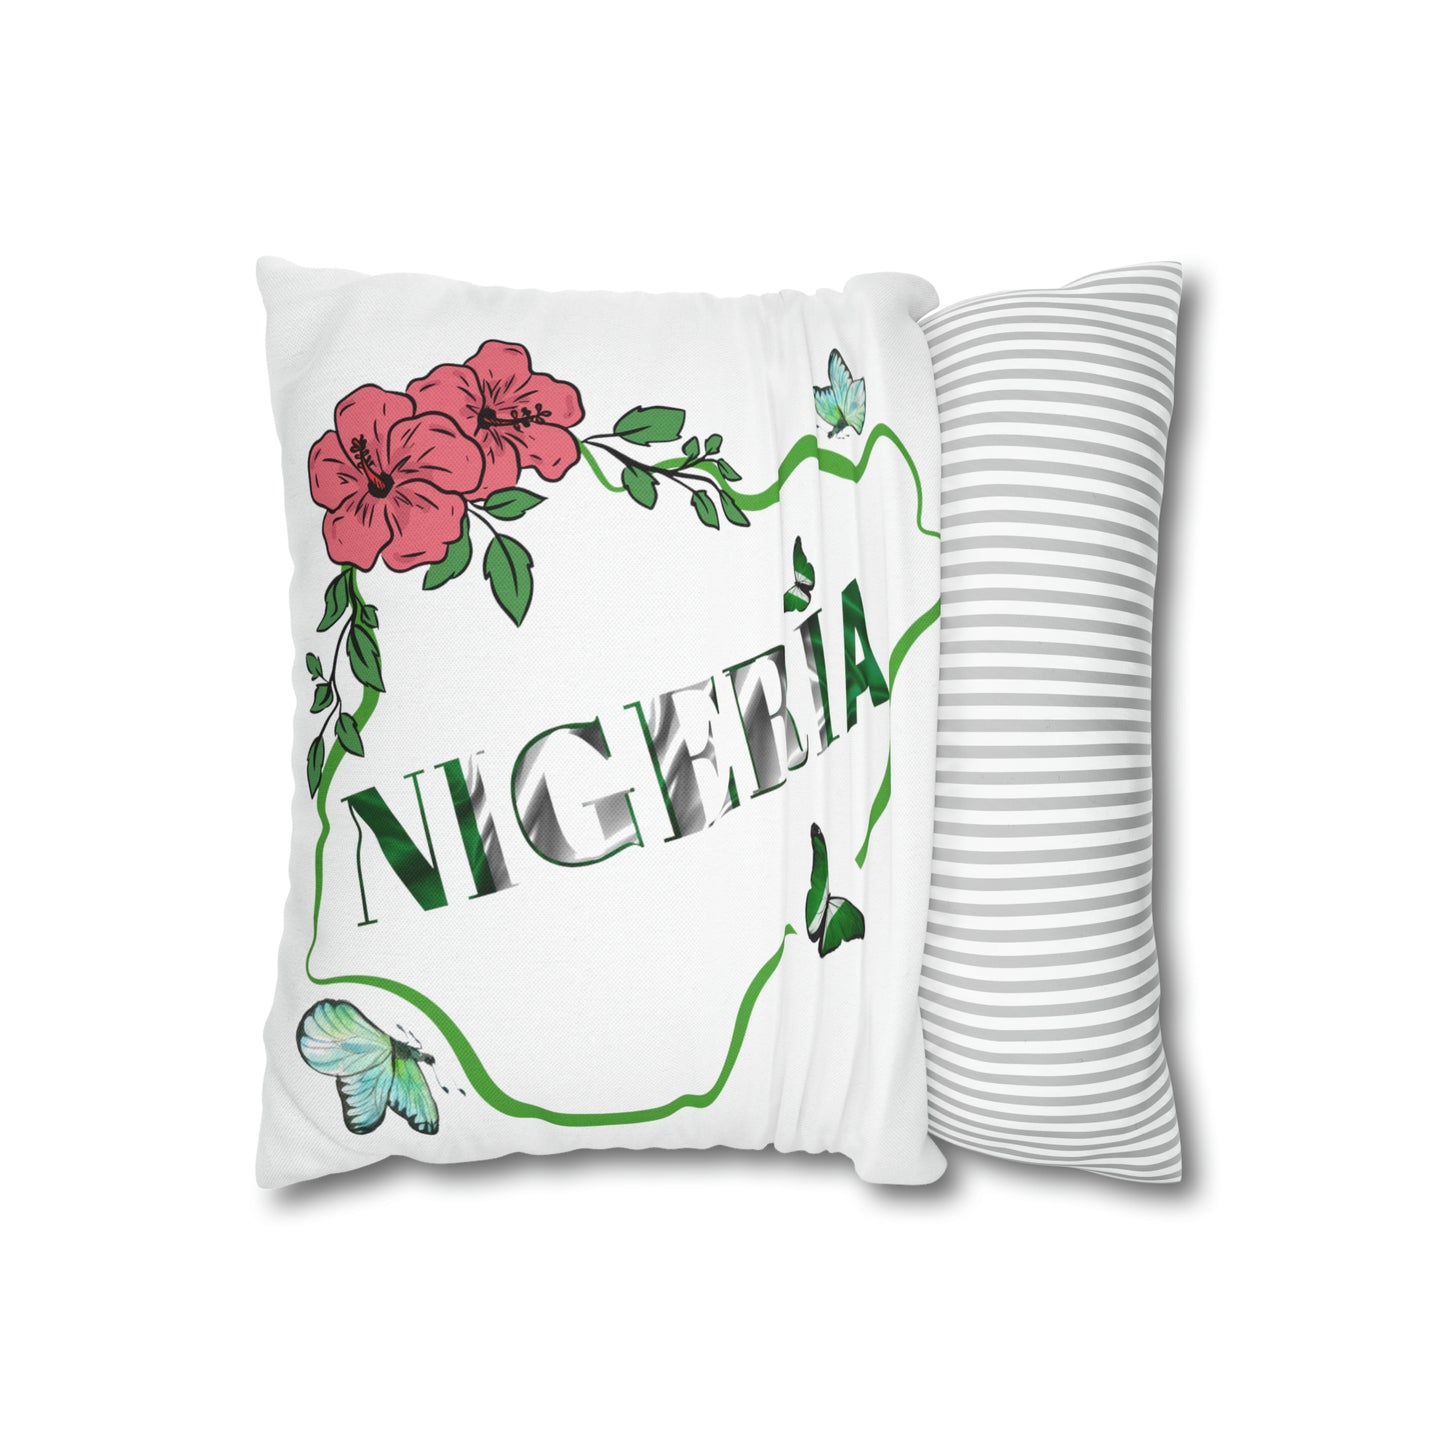 Nigeria Butterfly Spun Polyester Square Pillow Case